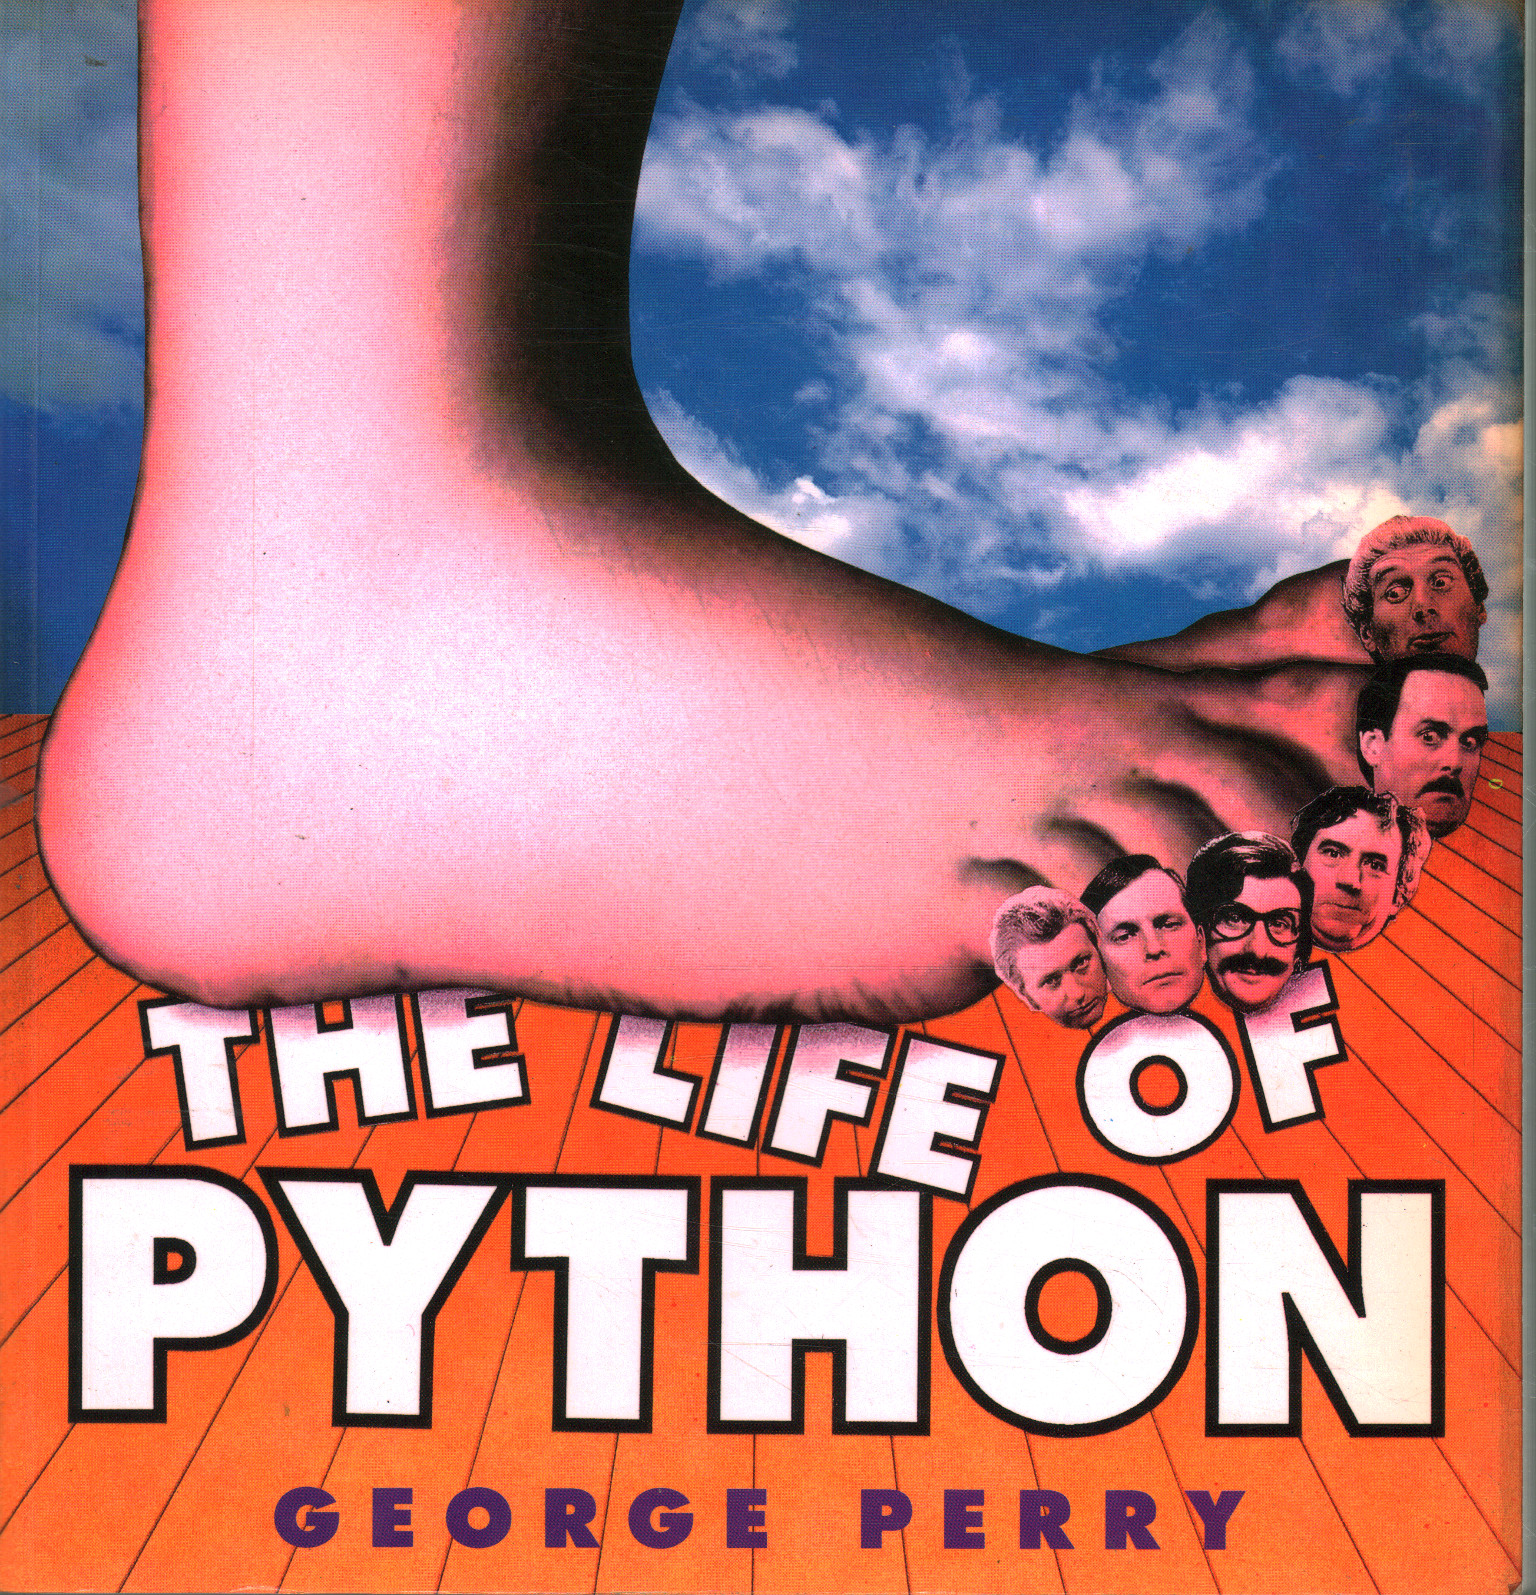 The life of Python, George Perry